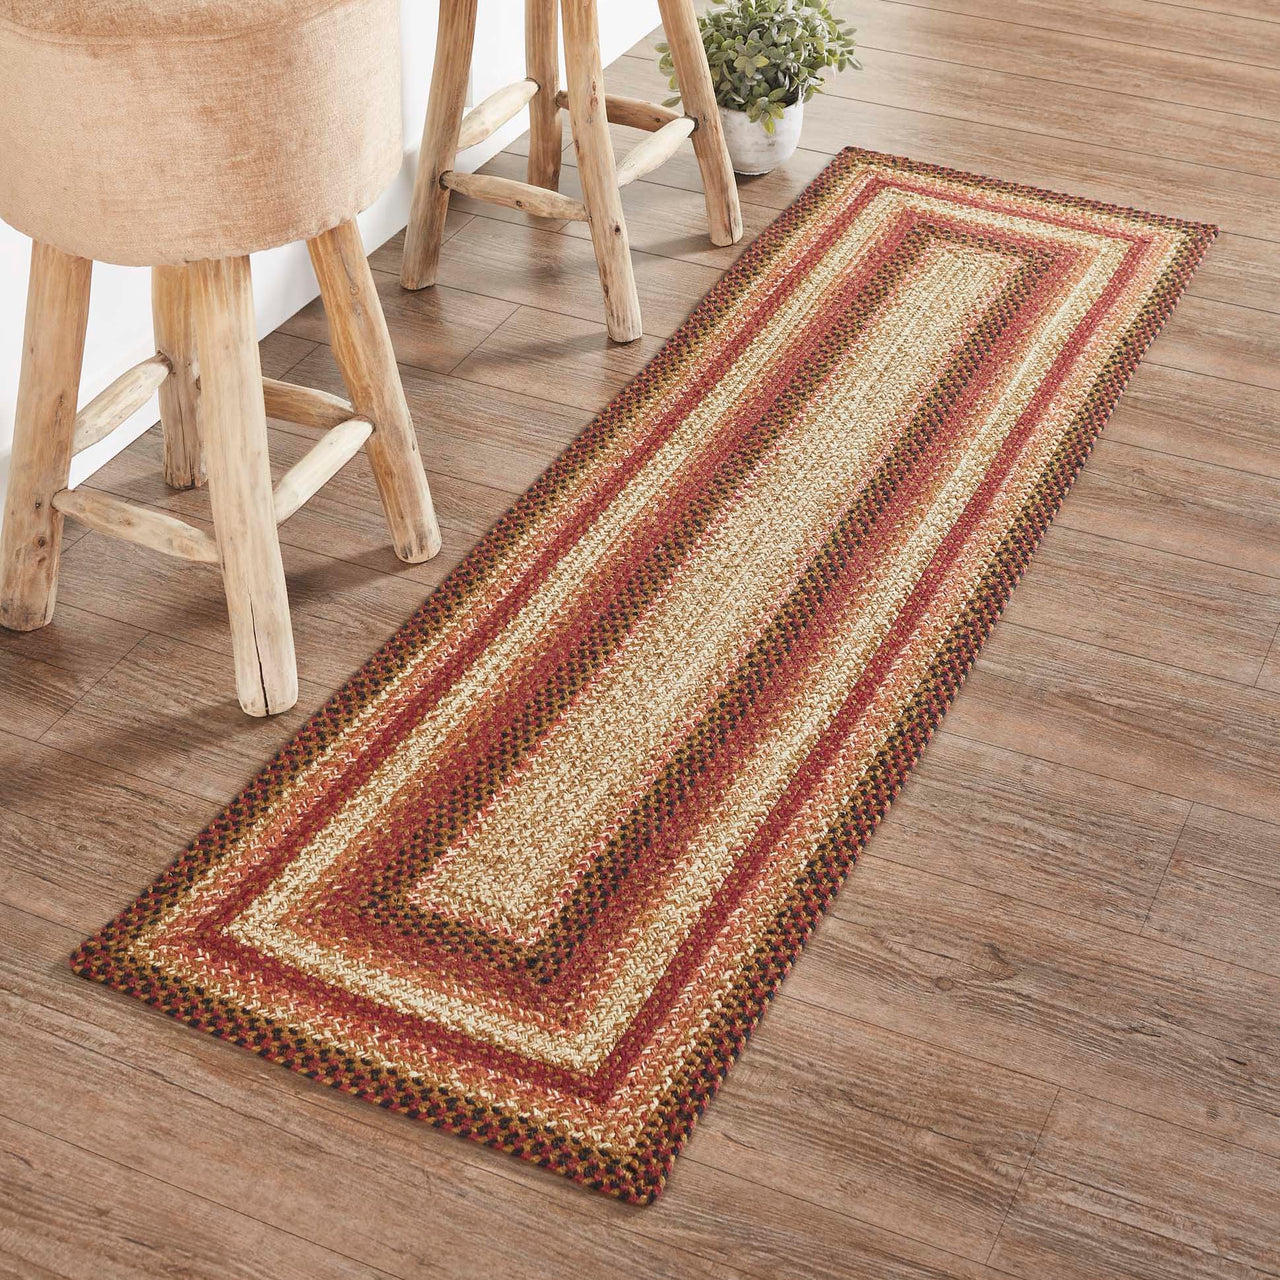 Ginger Spice Jute Braided Rug/Runner Rect with Rug Pad 22"x72" VHC Brands